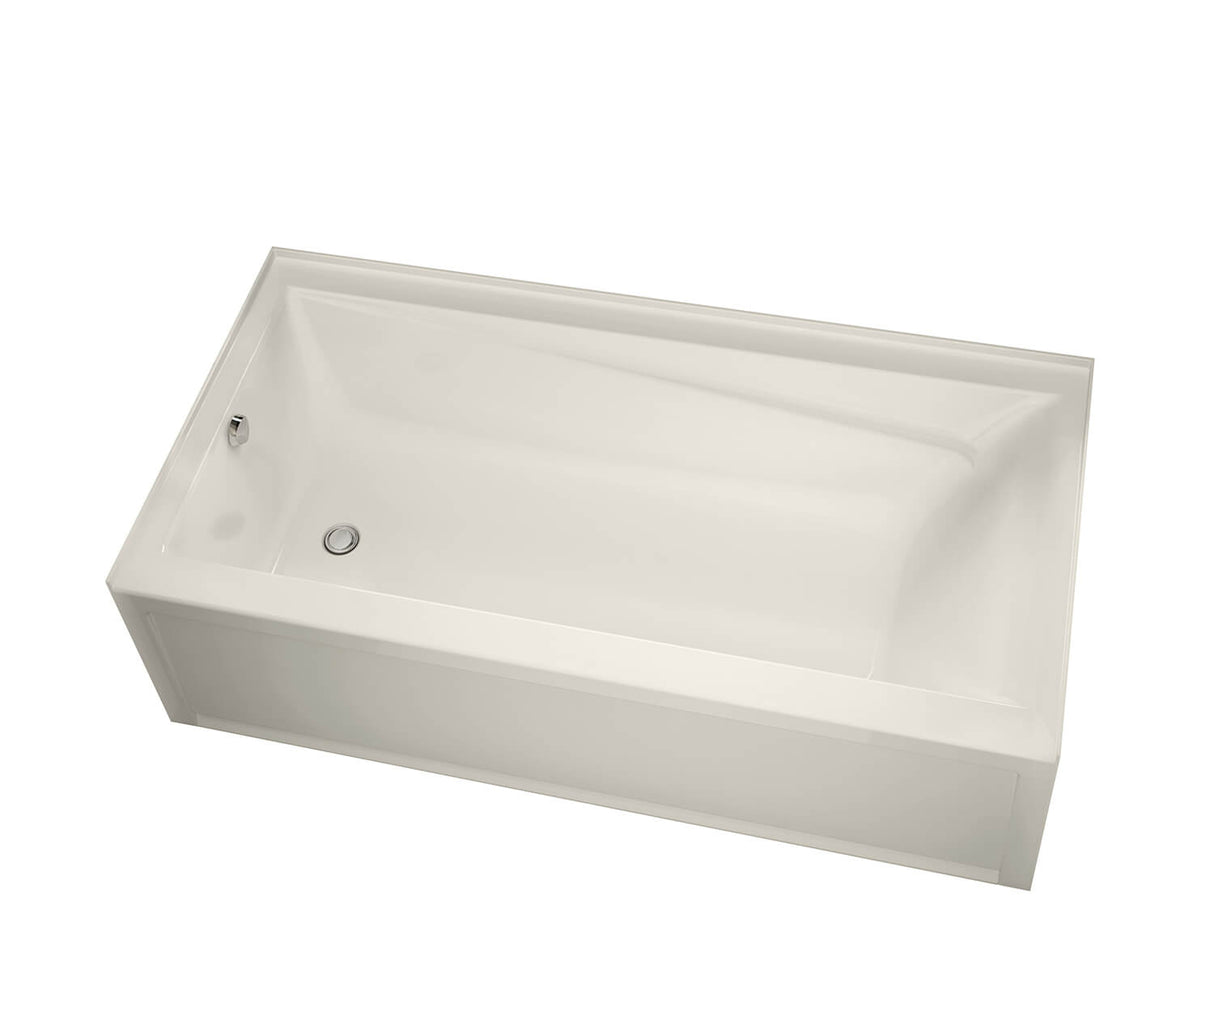 MAAX 105456-R-108-007 New Town 6032 IFS Acrylic Alcove Right-Hand Drain Aerosens Bathtub in Biscuit